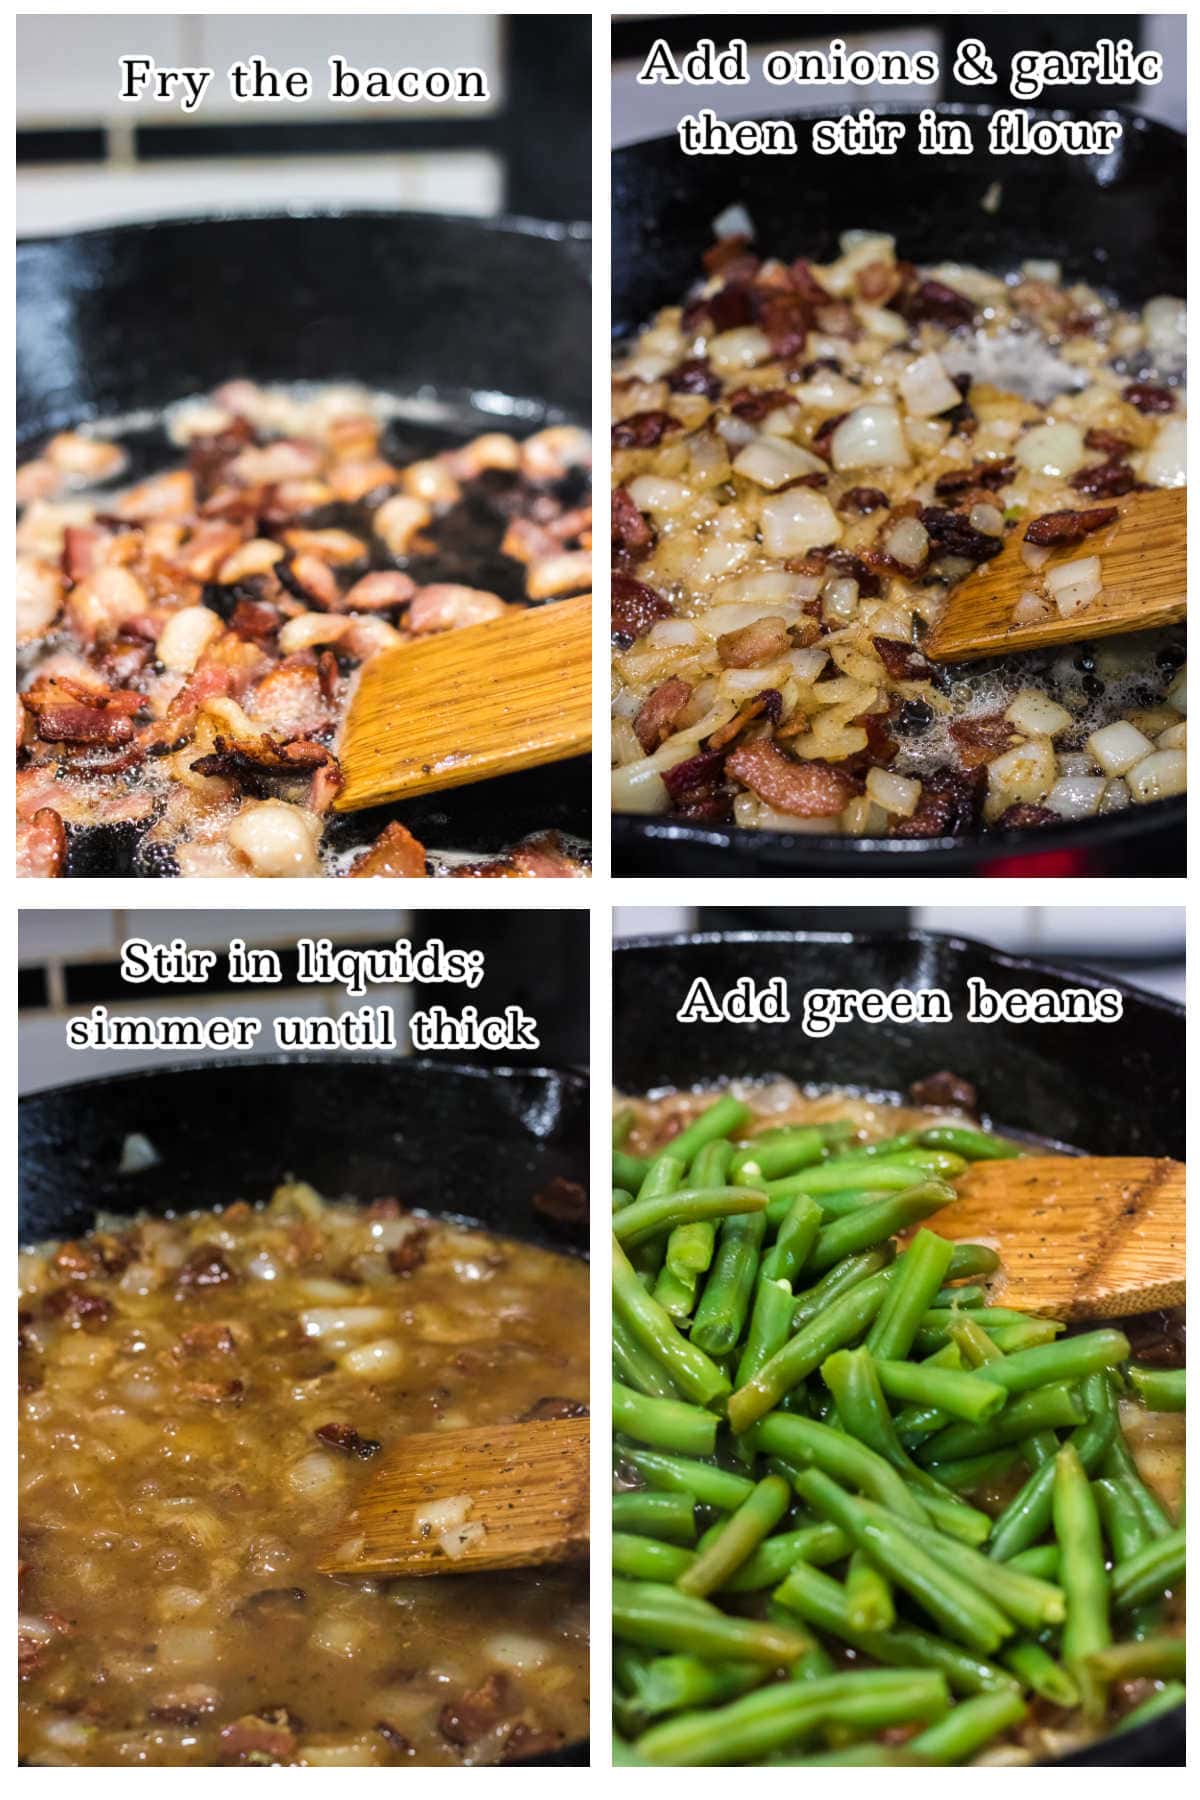 Step by step images showing how to make smothered green beans.